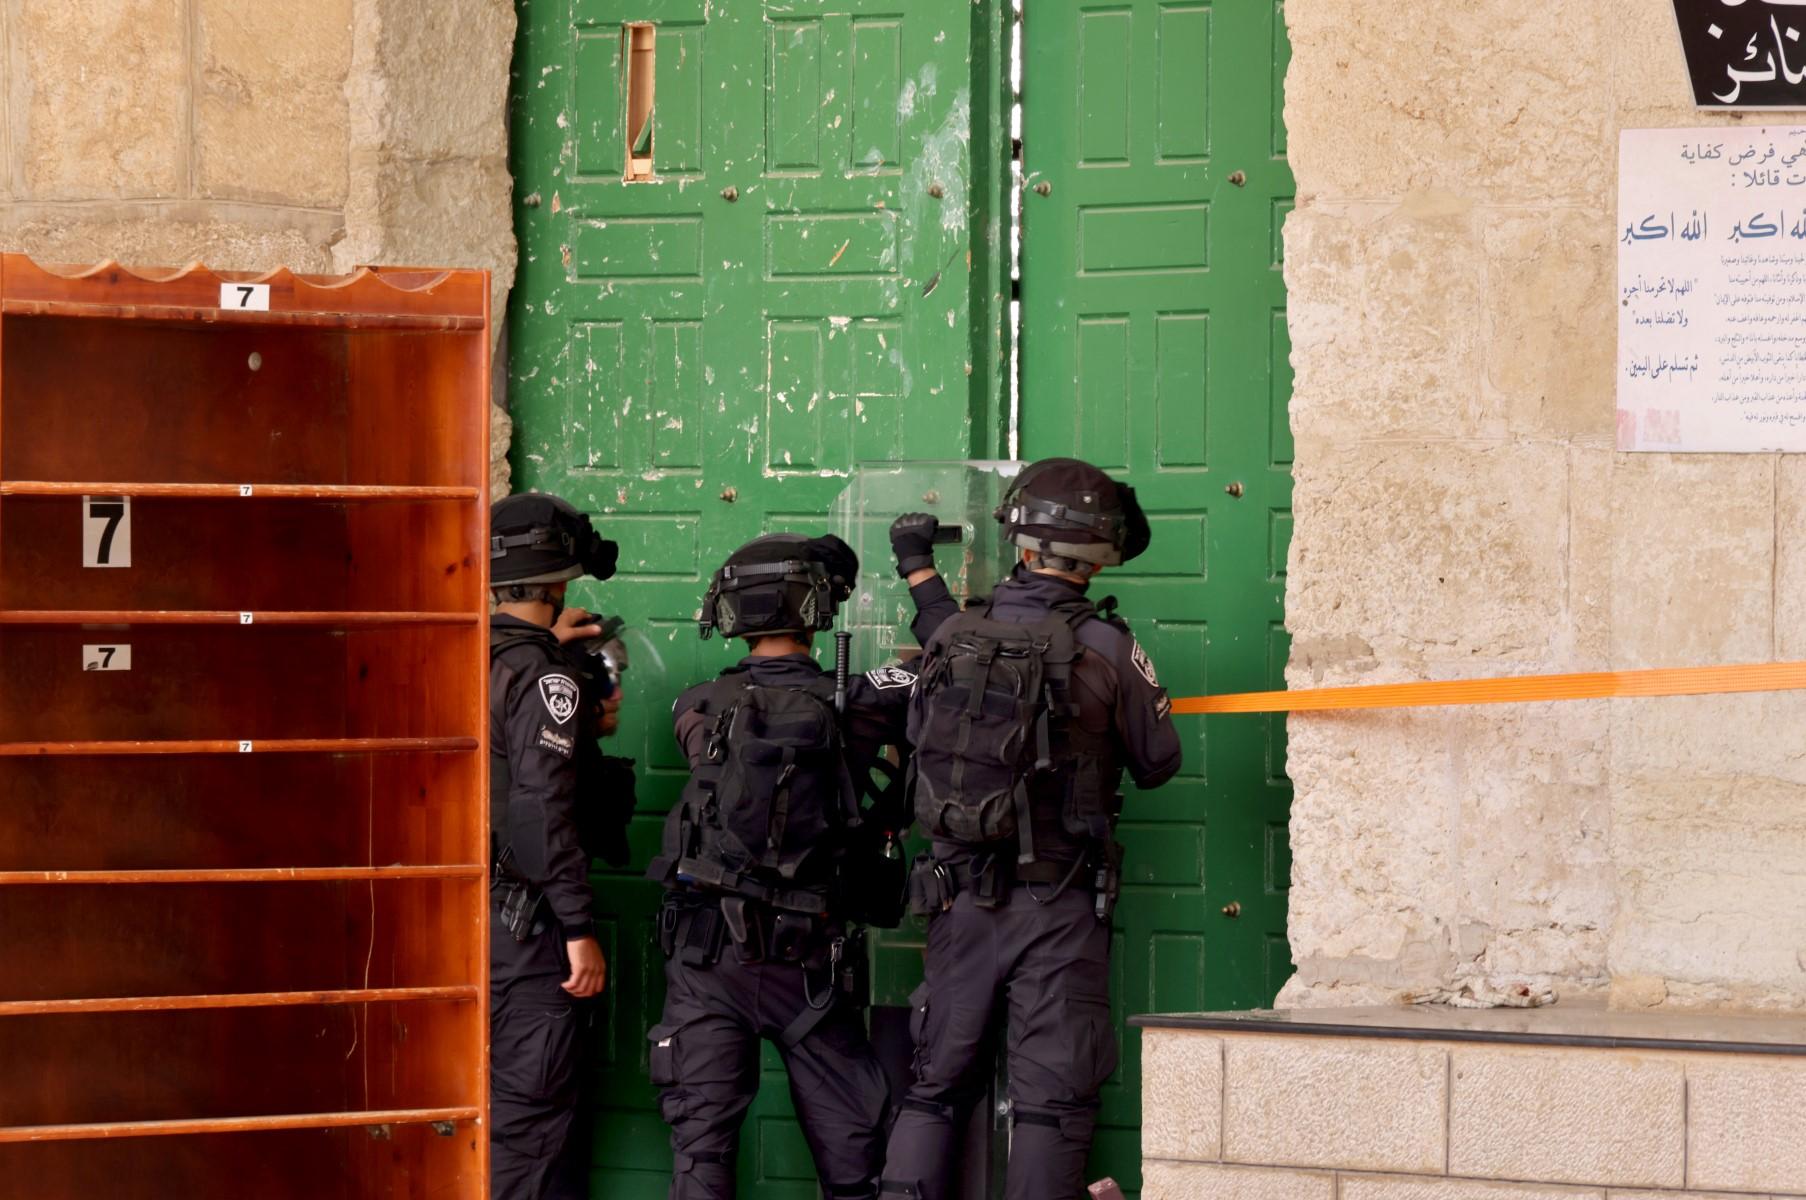 Israeli police secure the door of the Al-Aqsa mosque during clashes on May 5, at the compound which is the site of Islam's third-holiest place and of Judaism's holiest site, known to Jews as the Temple Mount, in the Old City of Jerusalem. Photo: AFP